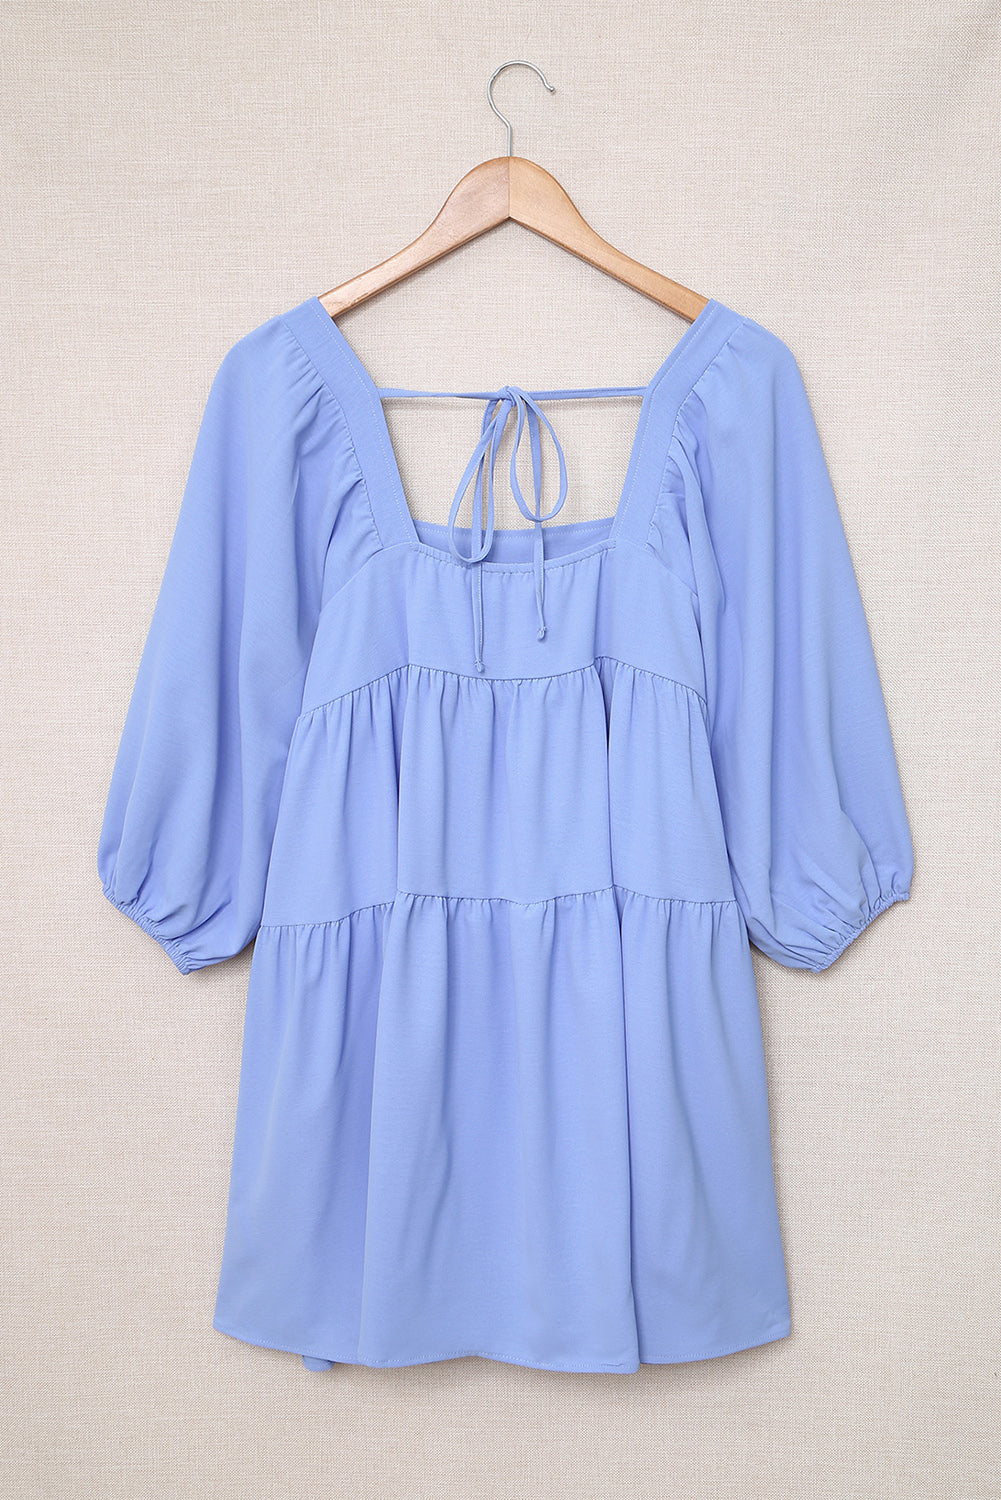 Light Blue Square Neck Lace Up Tiered Short Dress